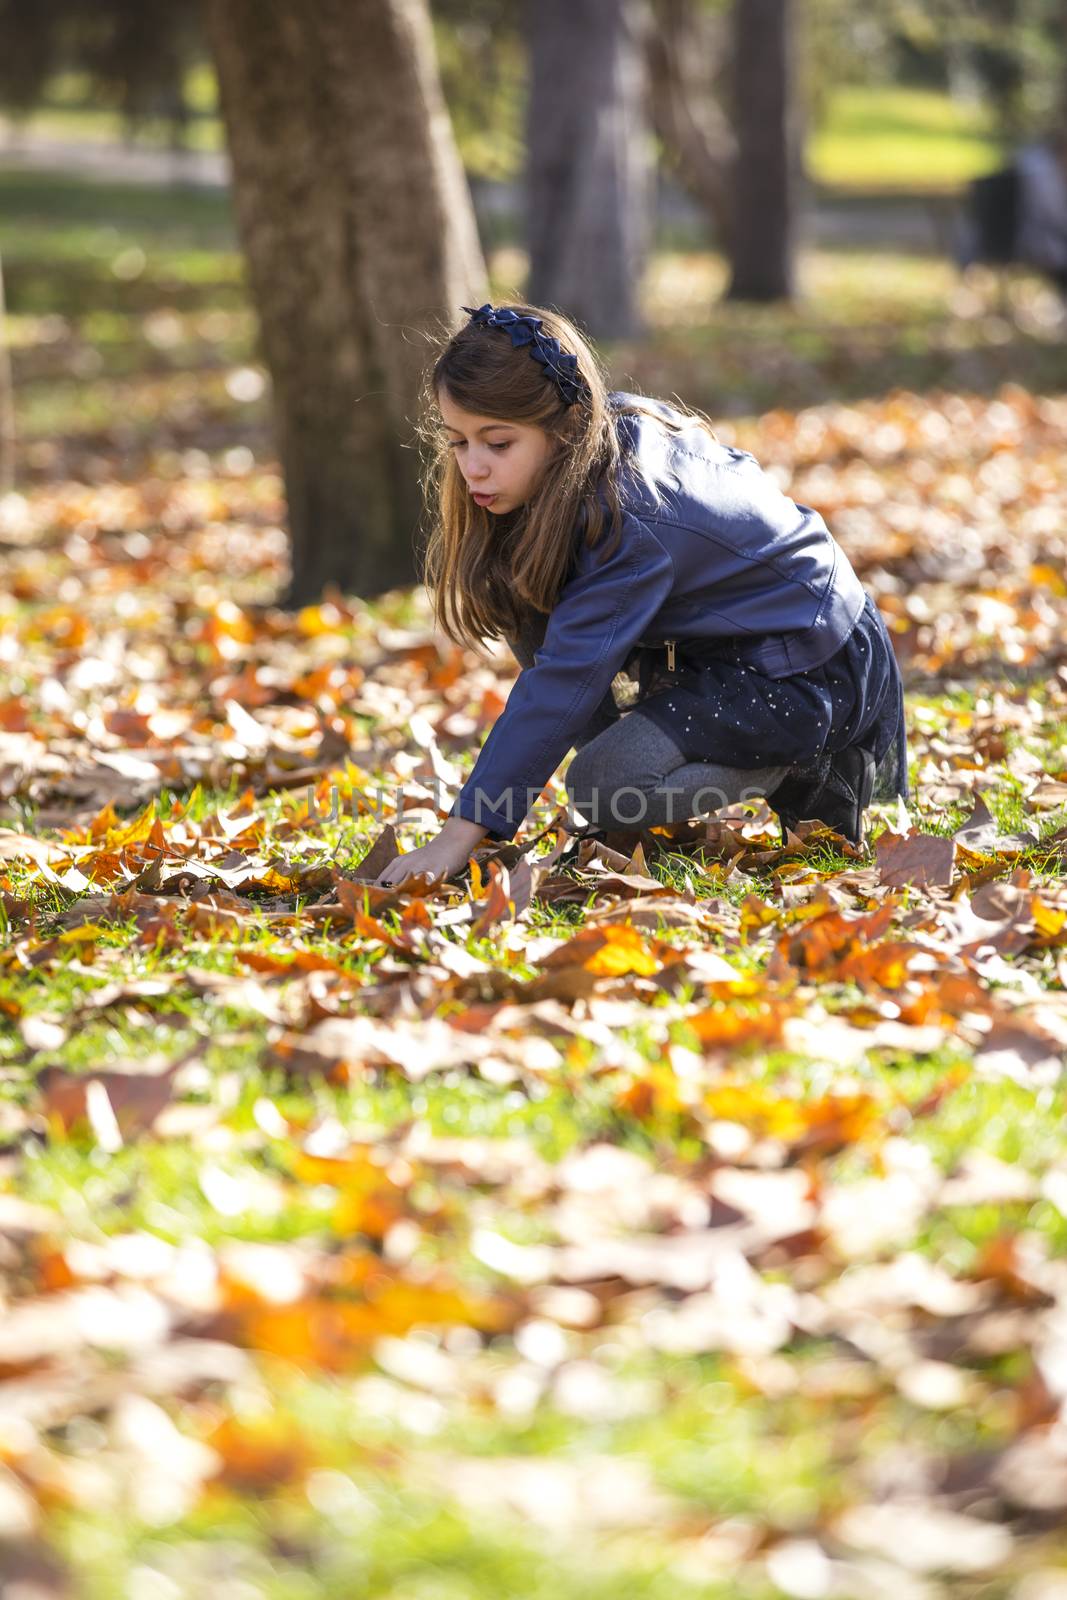 Girl in the park picking autumn leaves in the ground.